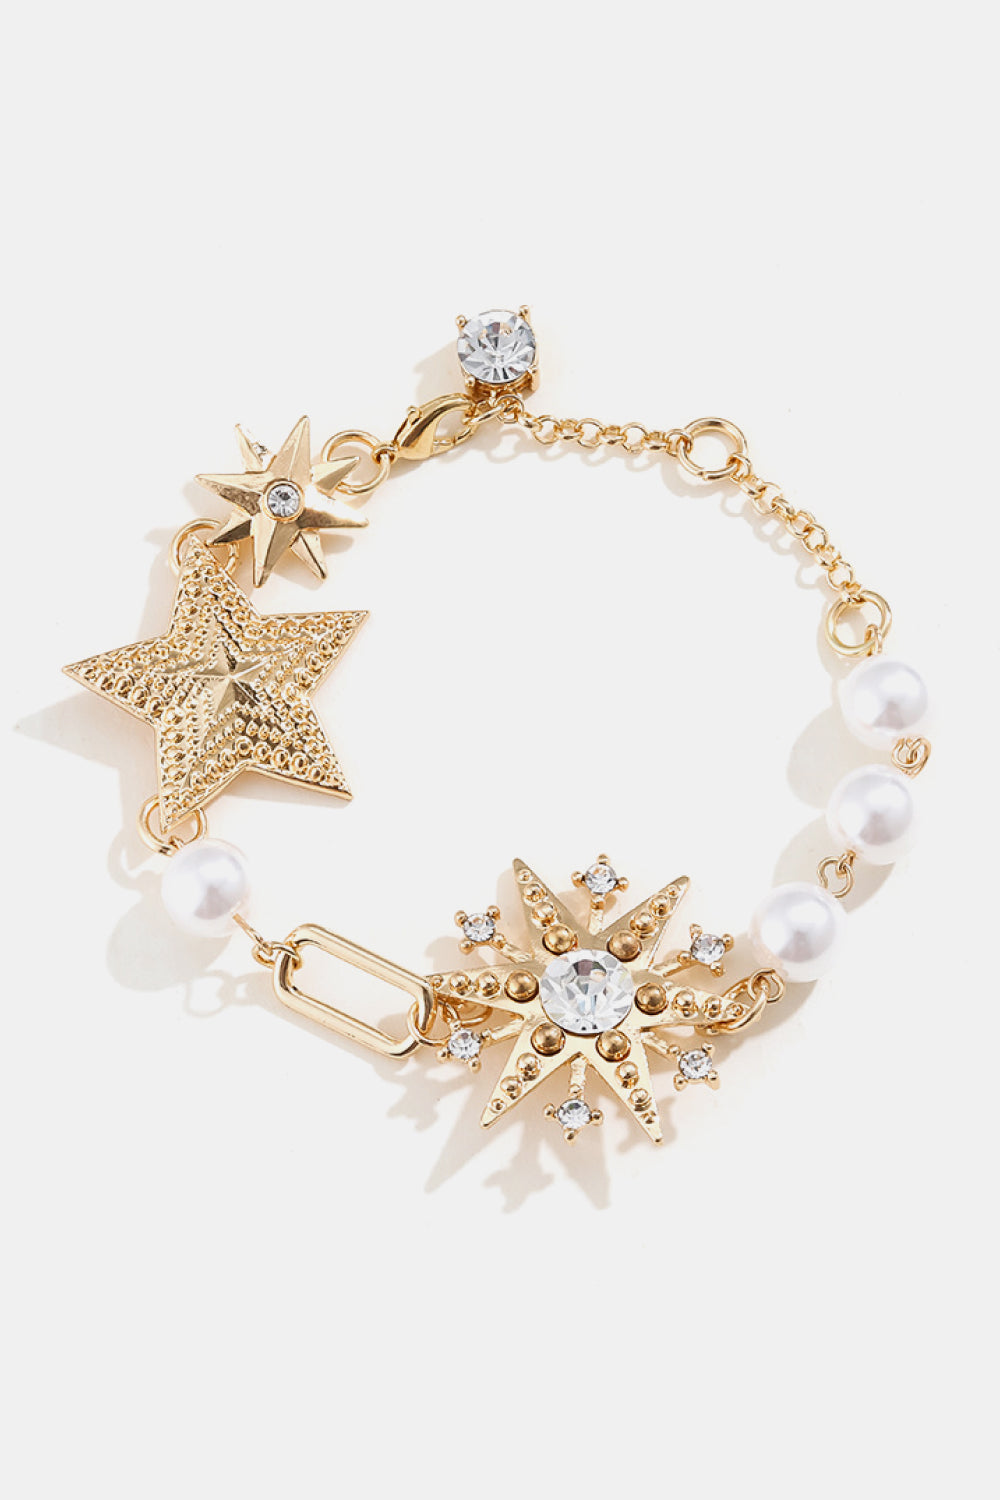 Synthetic Pearl Star Shape Alloy Bracelet - Tophatter Deals and Online Shopping - Electronics, Jewelry, Beauty, Health, Gadgets, Fashion - Tophatter's Discounts & Offers - tophatters - tophatters.co